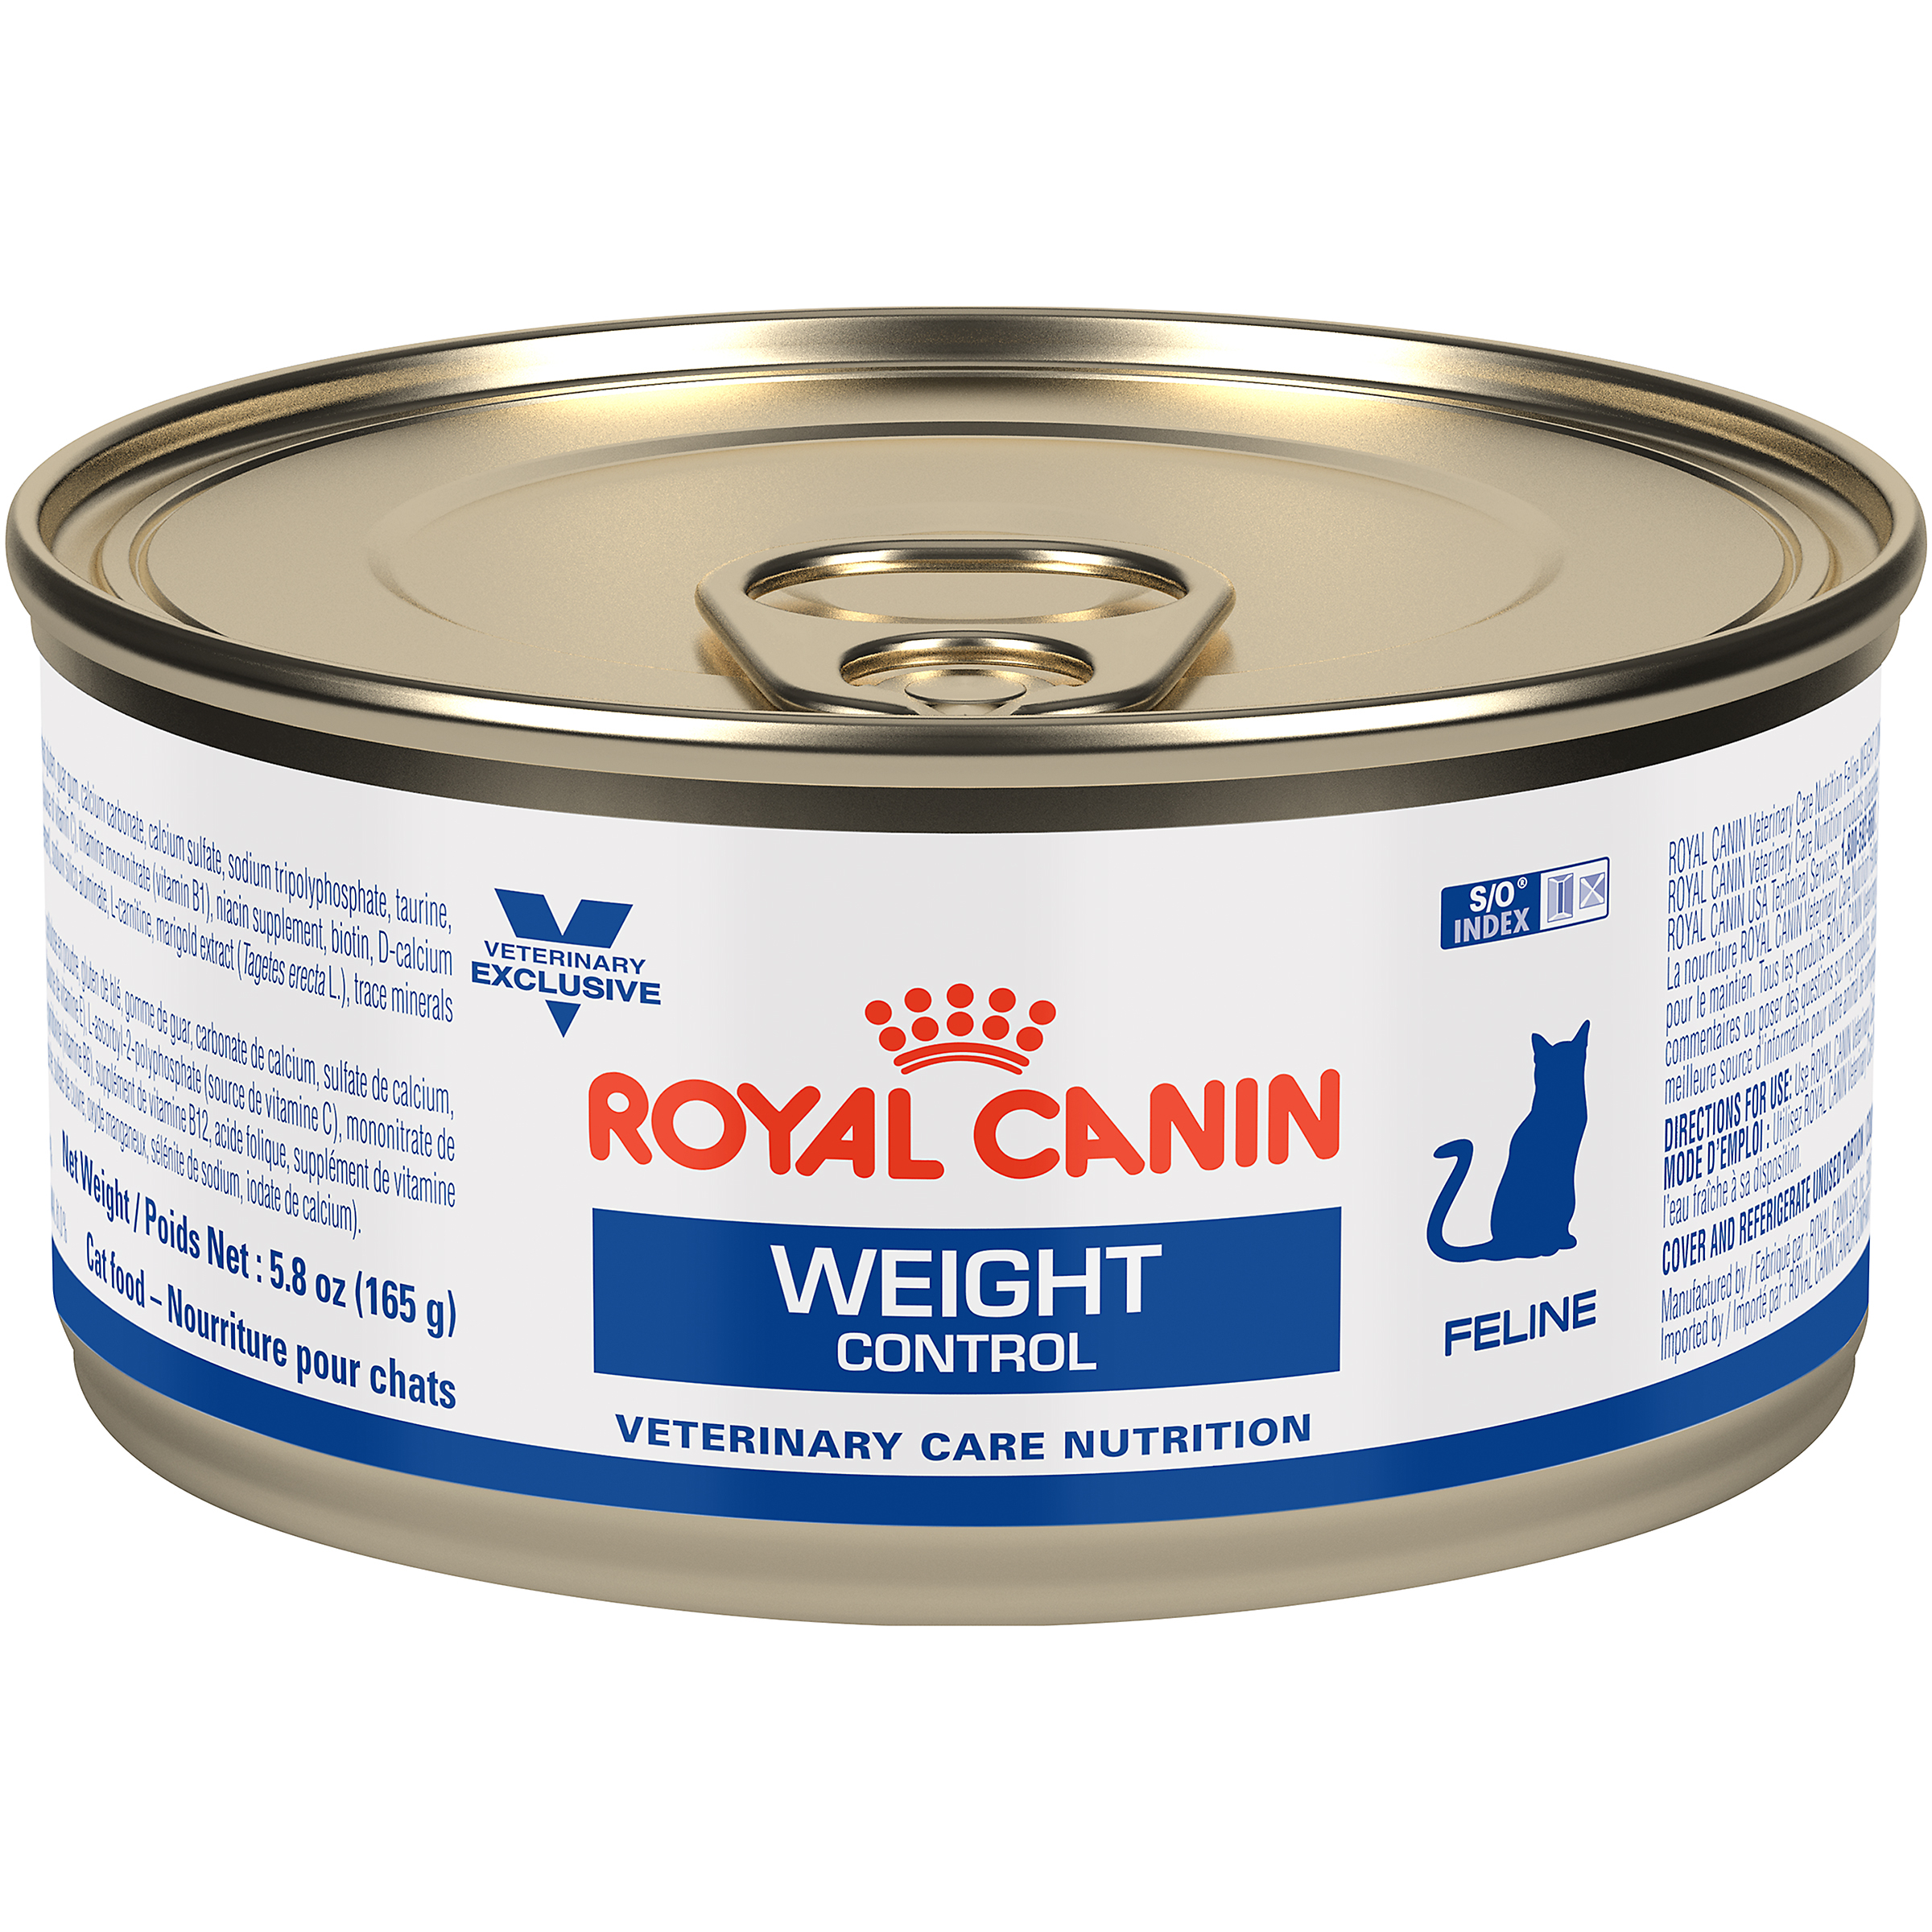 Feline Weight Control Canned Cat Food Royal Canin